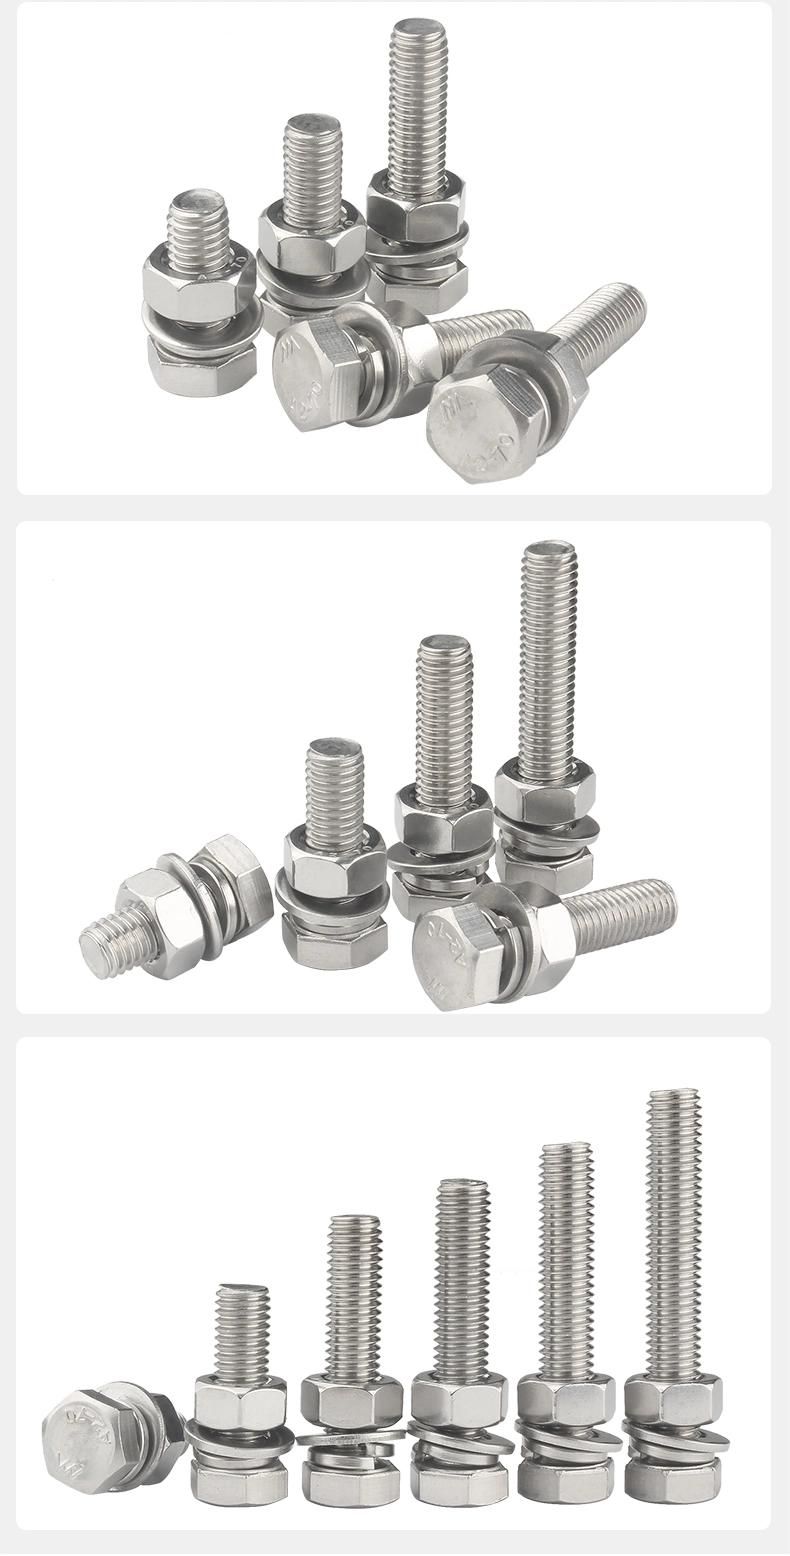 China Factory Fasteners Steel Hex Bolt DIN933 Stainless Steel M8 M16 M20 Hex Bolt and Nut Bolt